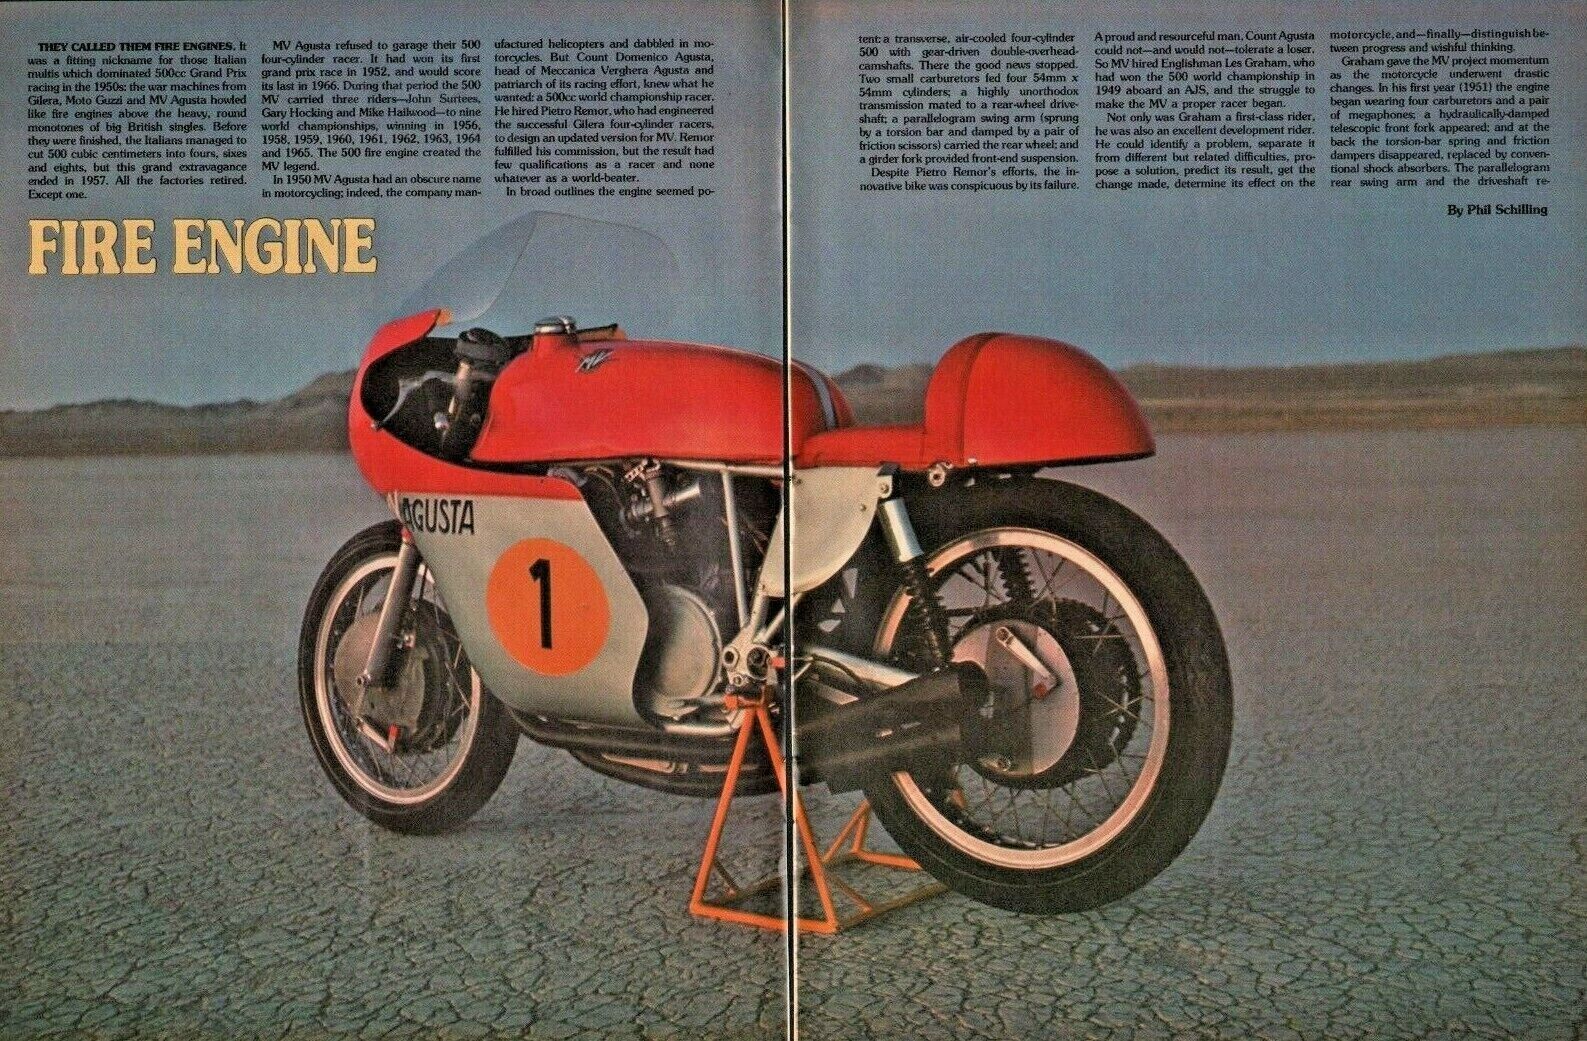 1976 MV Agusta 500 Fire Engine - 6-Page Vintage Motorcycle Article